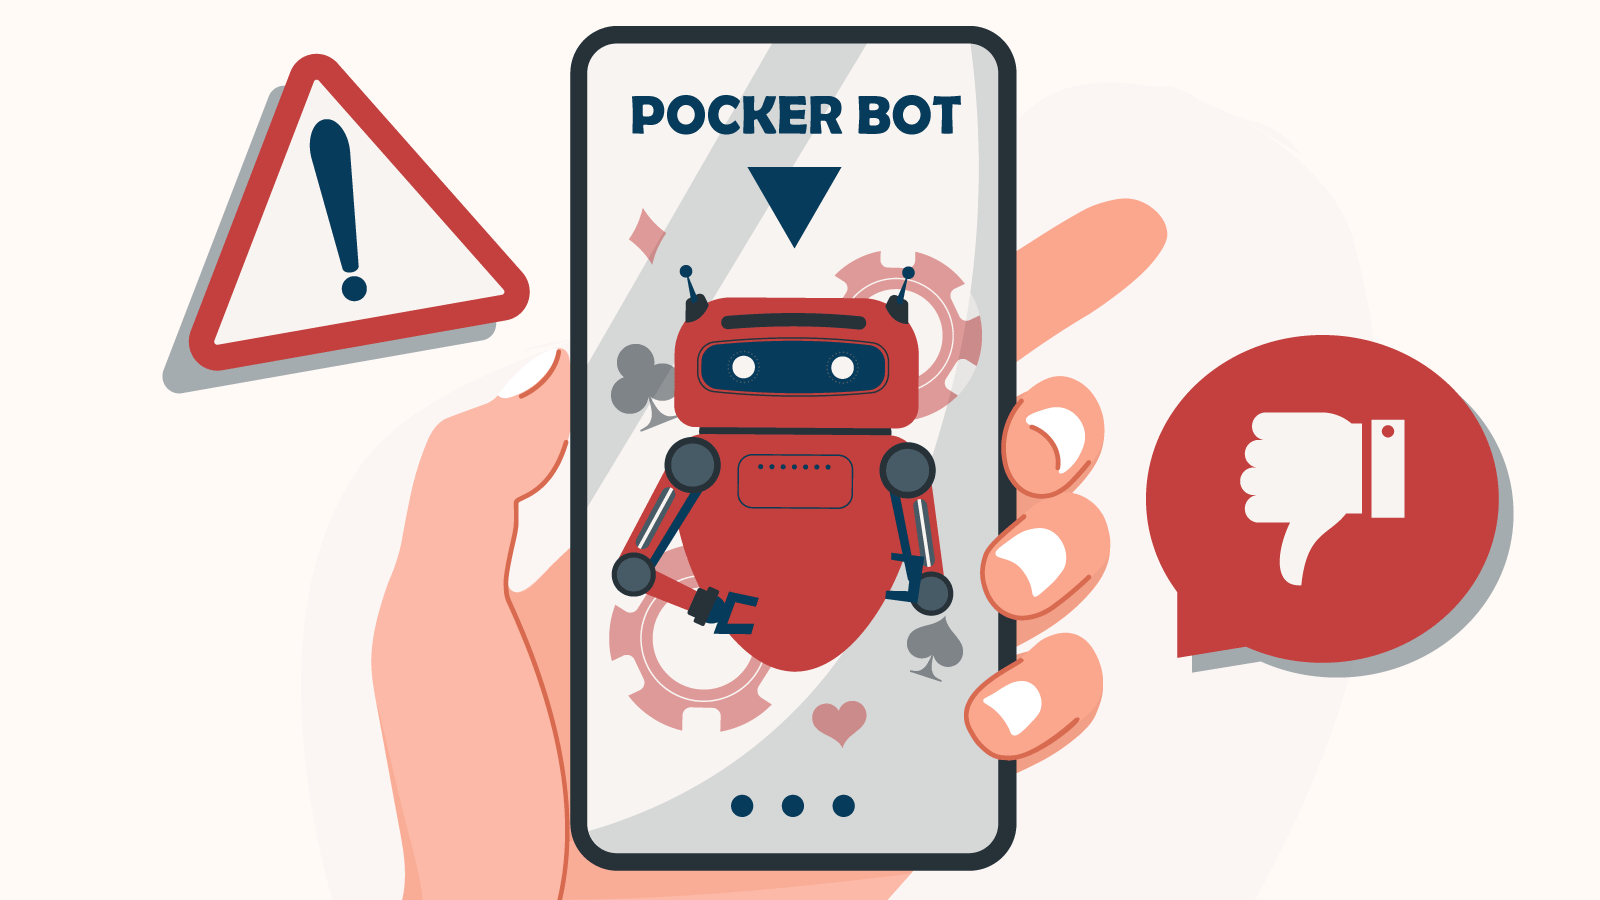 The ethical status of poker bots